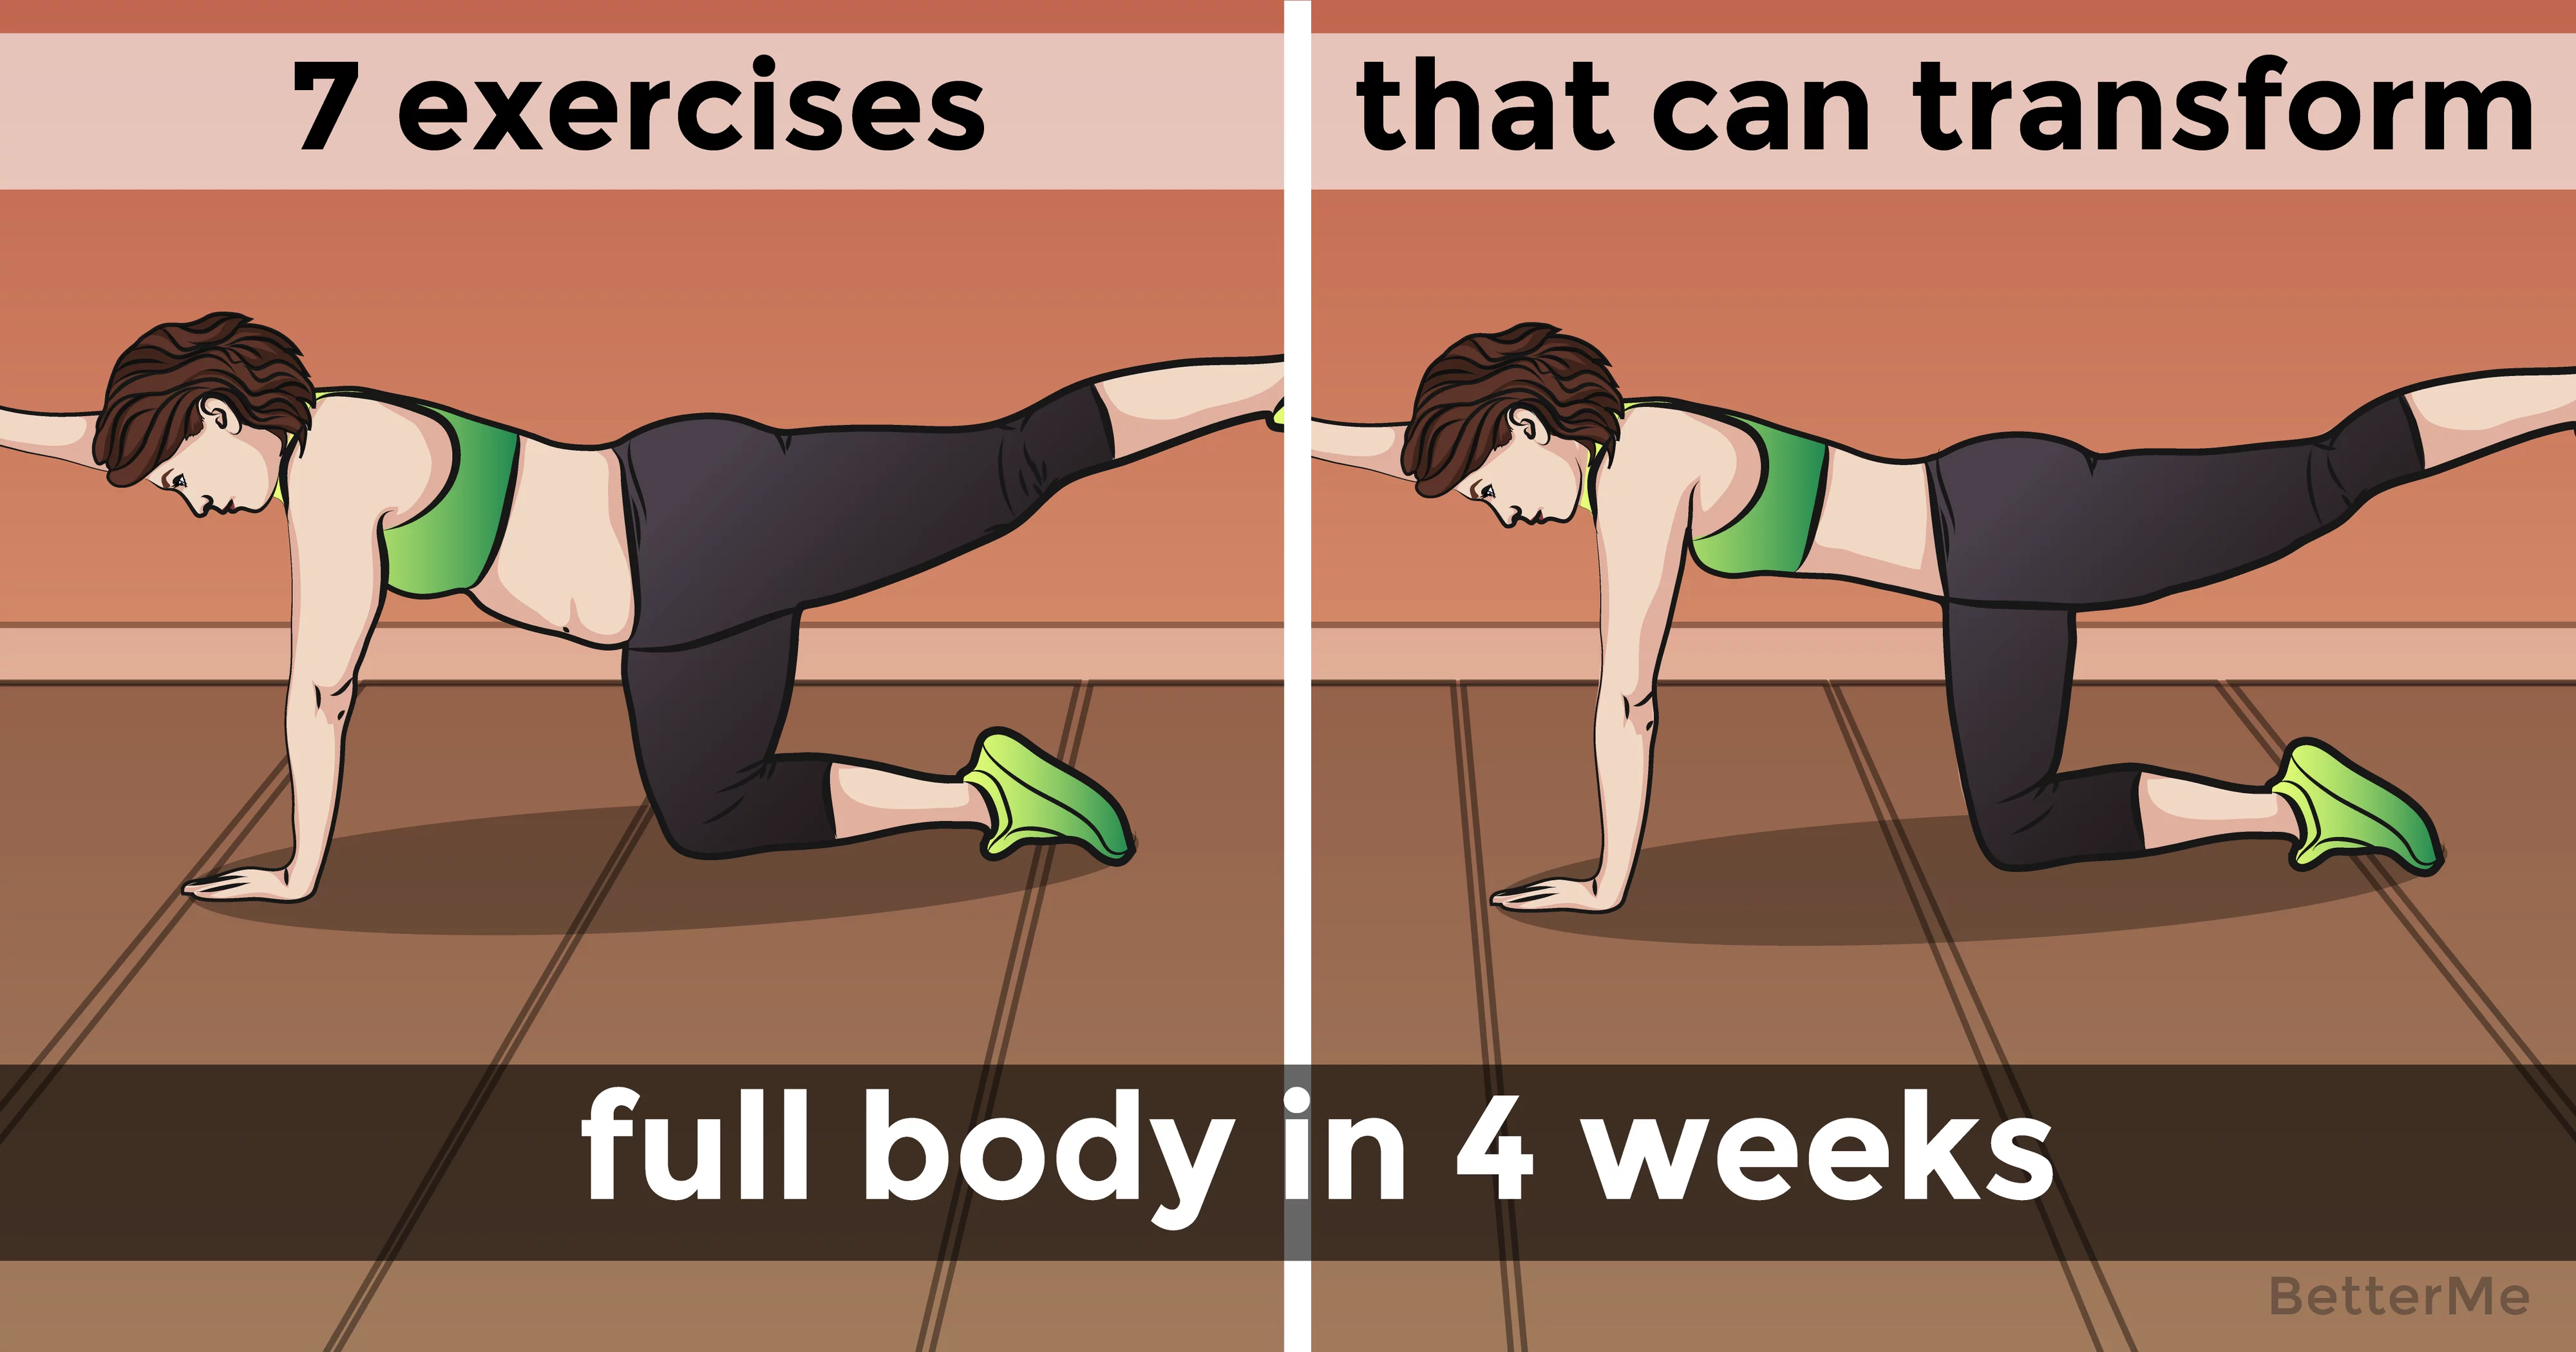 7 exercises can transform your entire body in 4 weeks